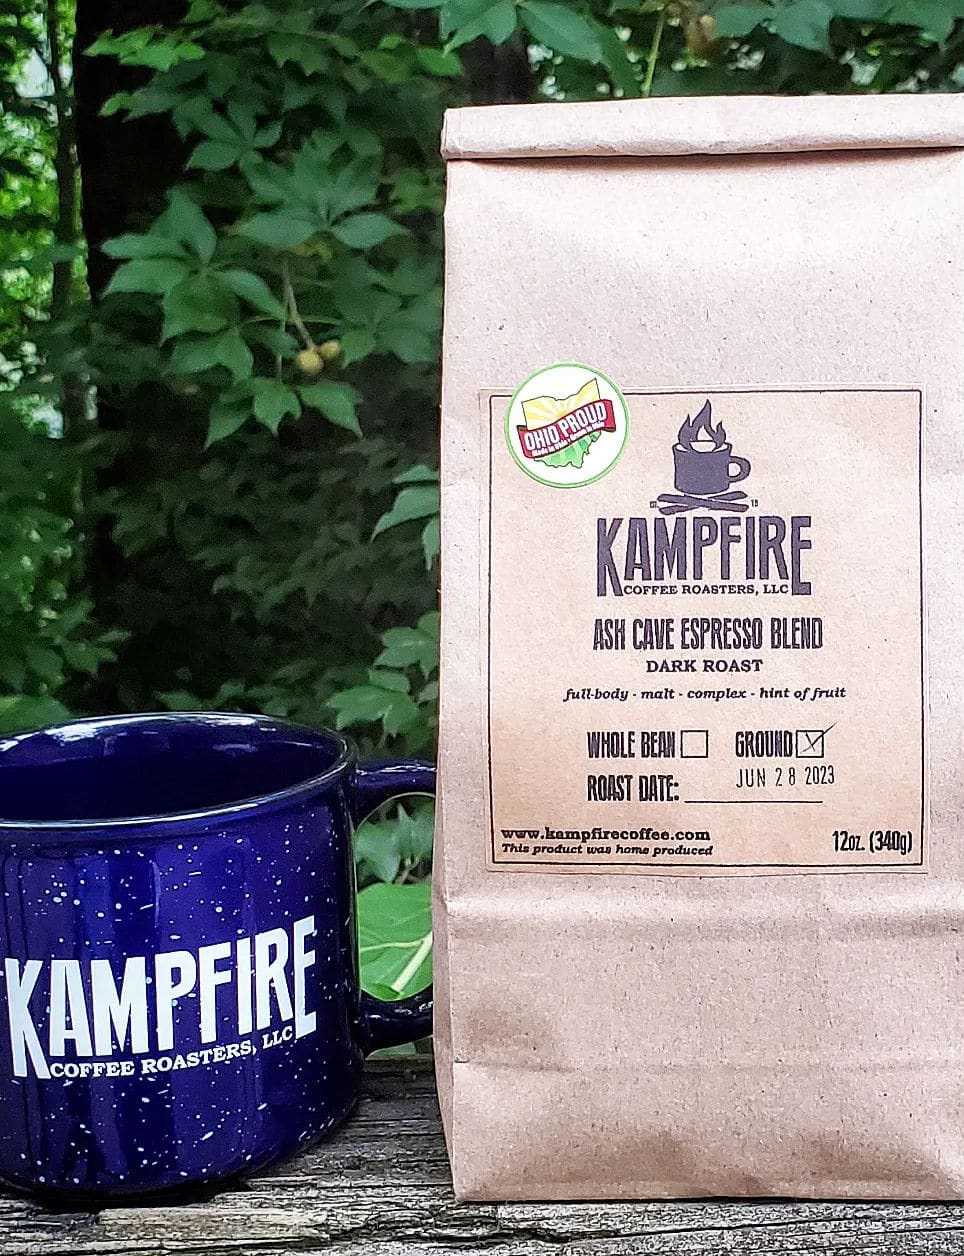 horizontal photo of a bag of Kampfire Ash Cave Espresso Blend coffe, with a blue Kampfire coffee mug beside it, on an outdoor wooden table. A large tree with lots of green foliage is in the background. Image courtesy of Kampfire Coffee Roasters